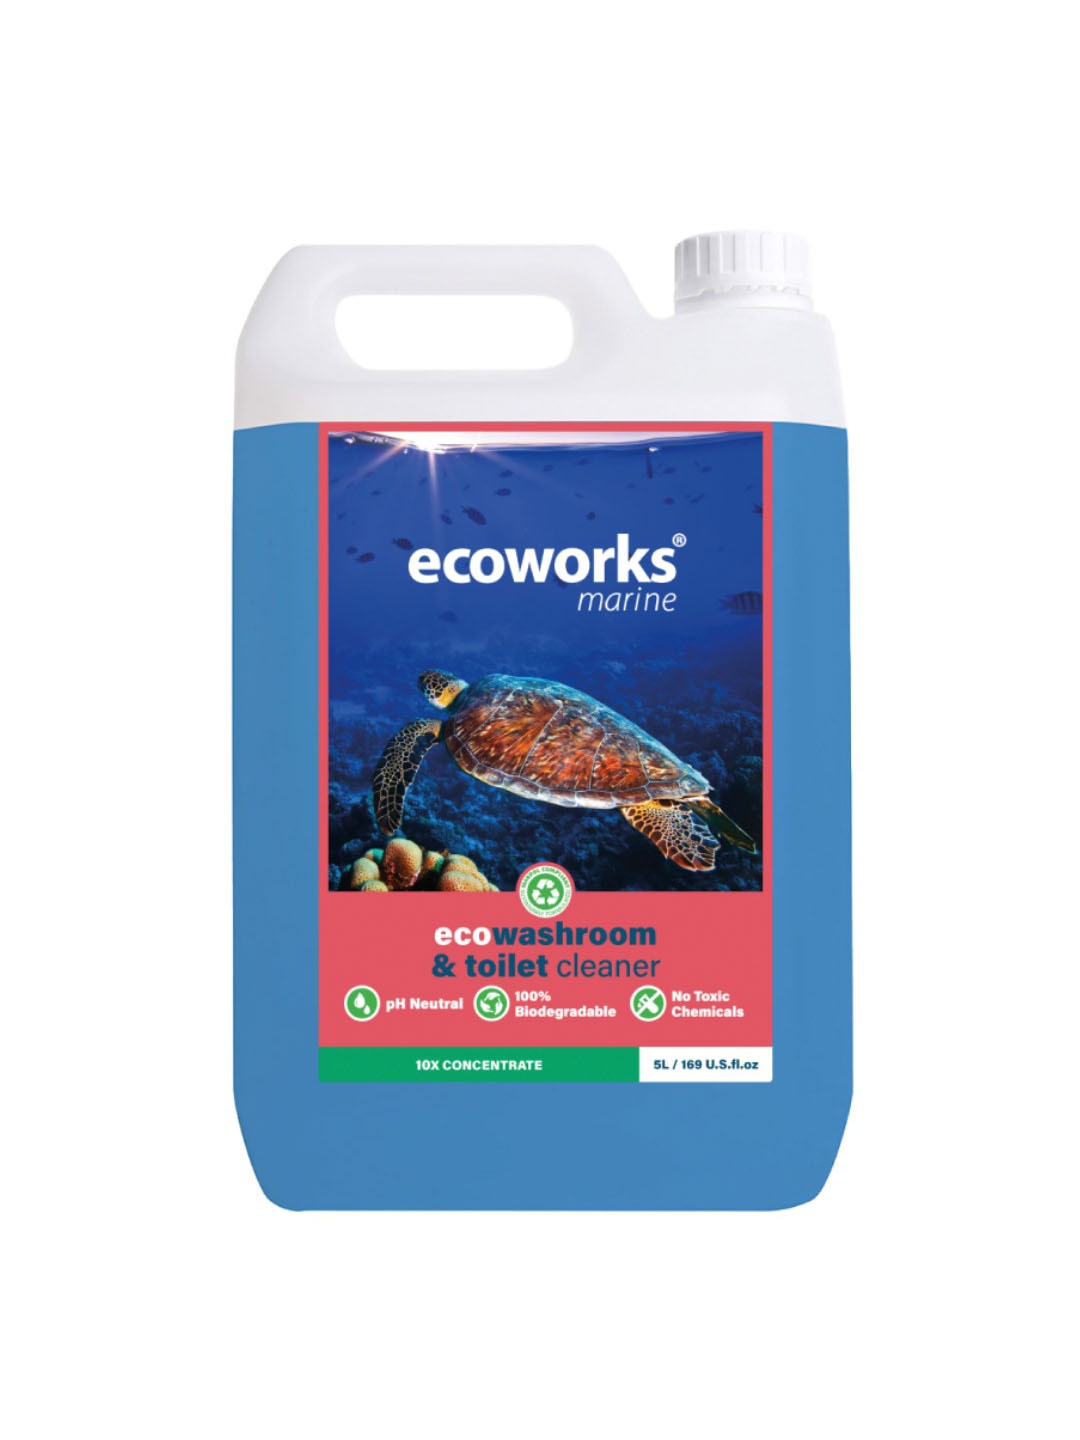 Eco washroom & toilet cleaner - Concentrate